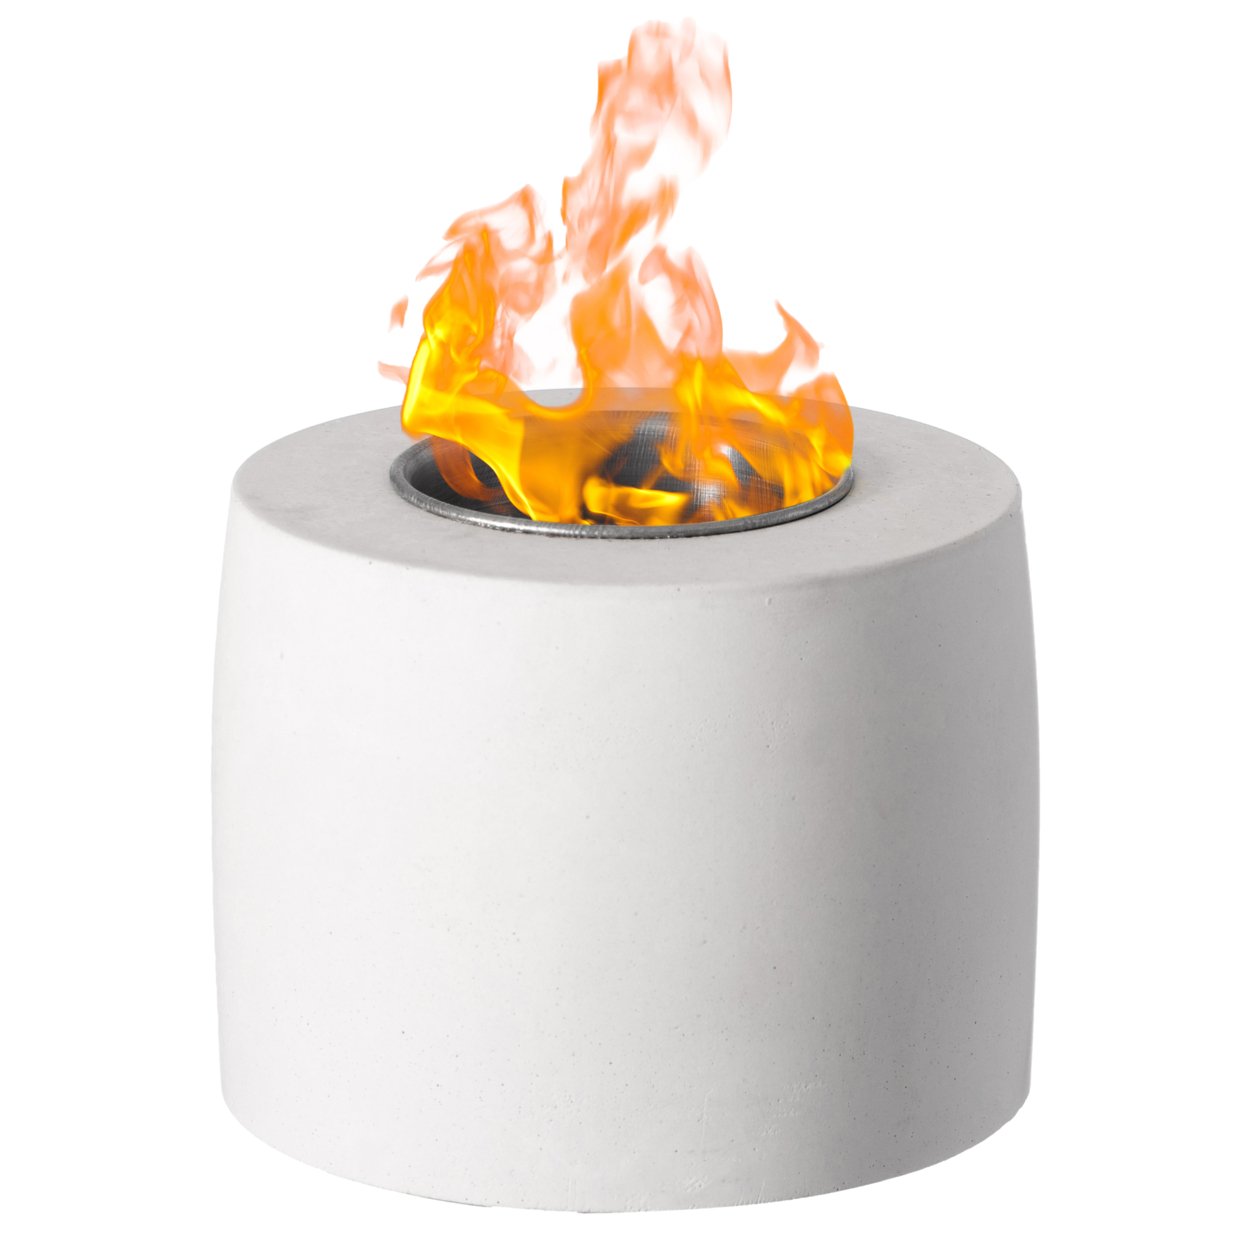 Mini Tabletop Fire Pit Rubbing Alcohol Fireplace Indoor Outdoor Portable Fire Concrete Bowl Pot Fireplace - Bowl